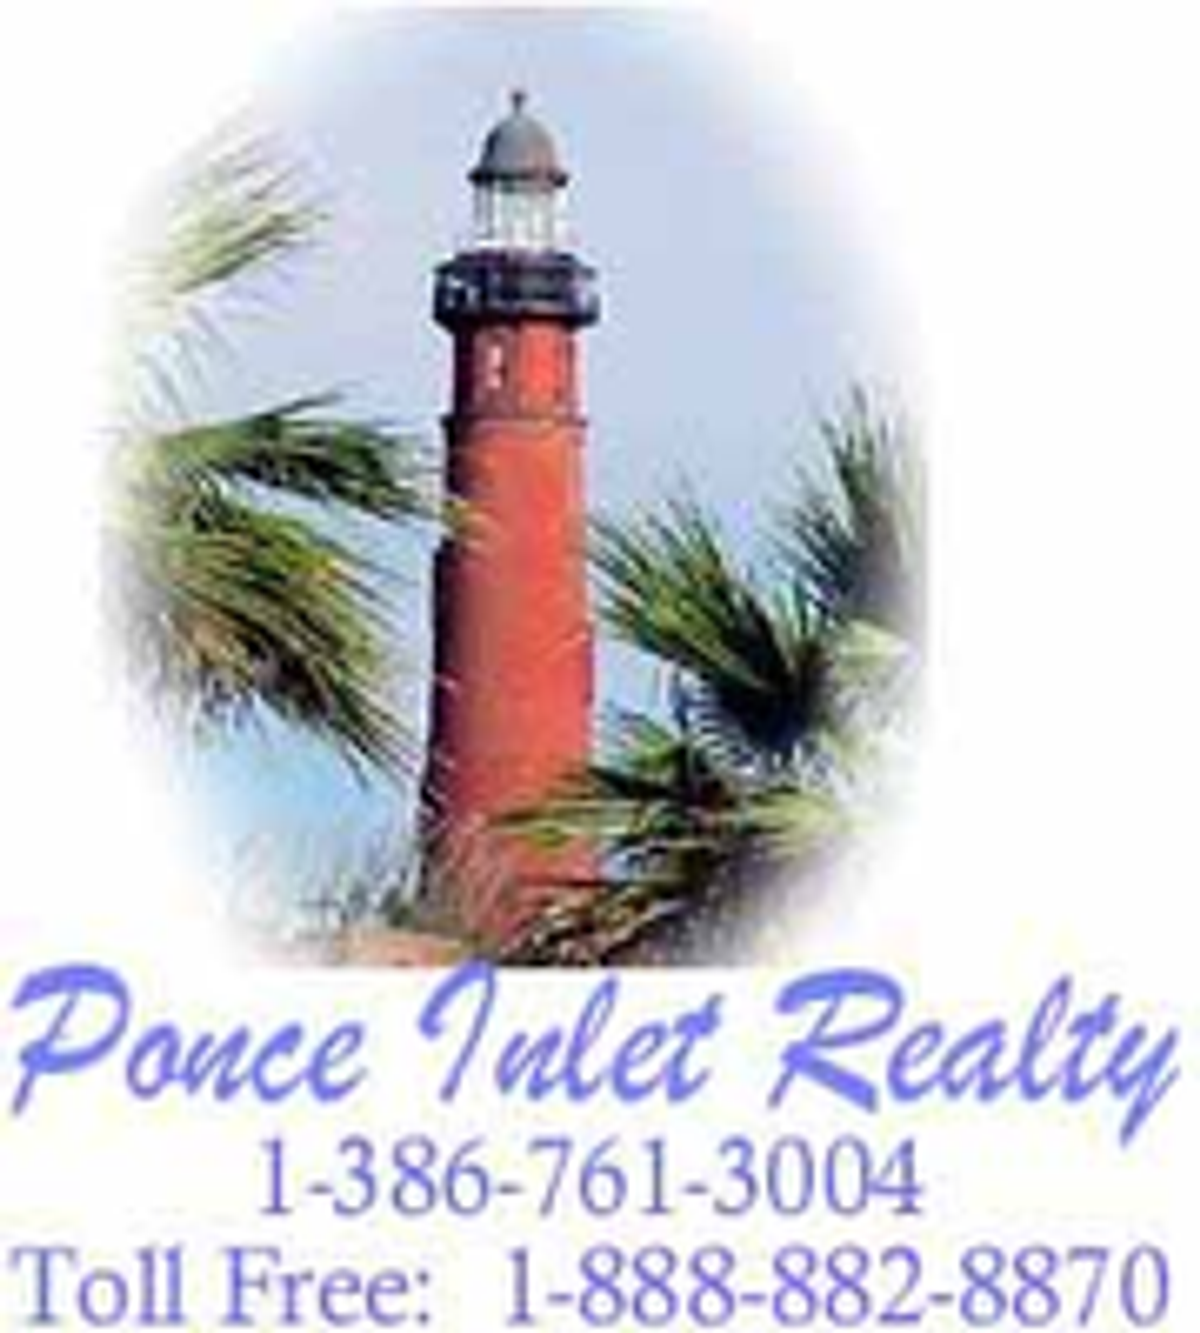 Photo for Darlene Bright-Day, Listing Agent at Ponce Inlet Realty, Inc